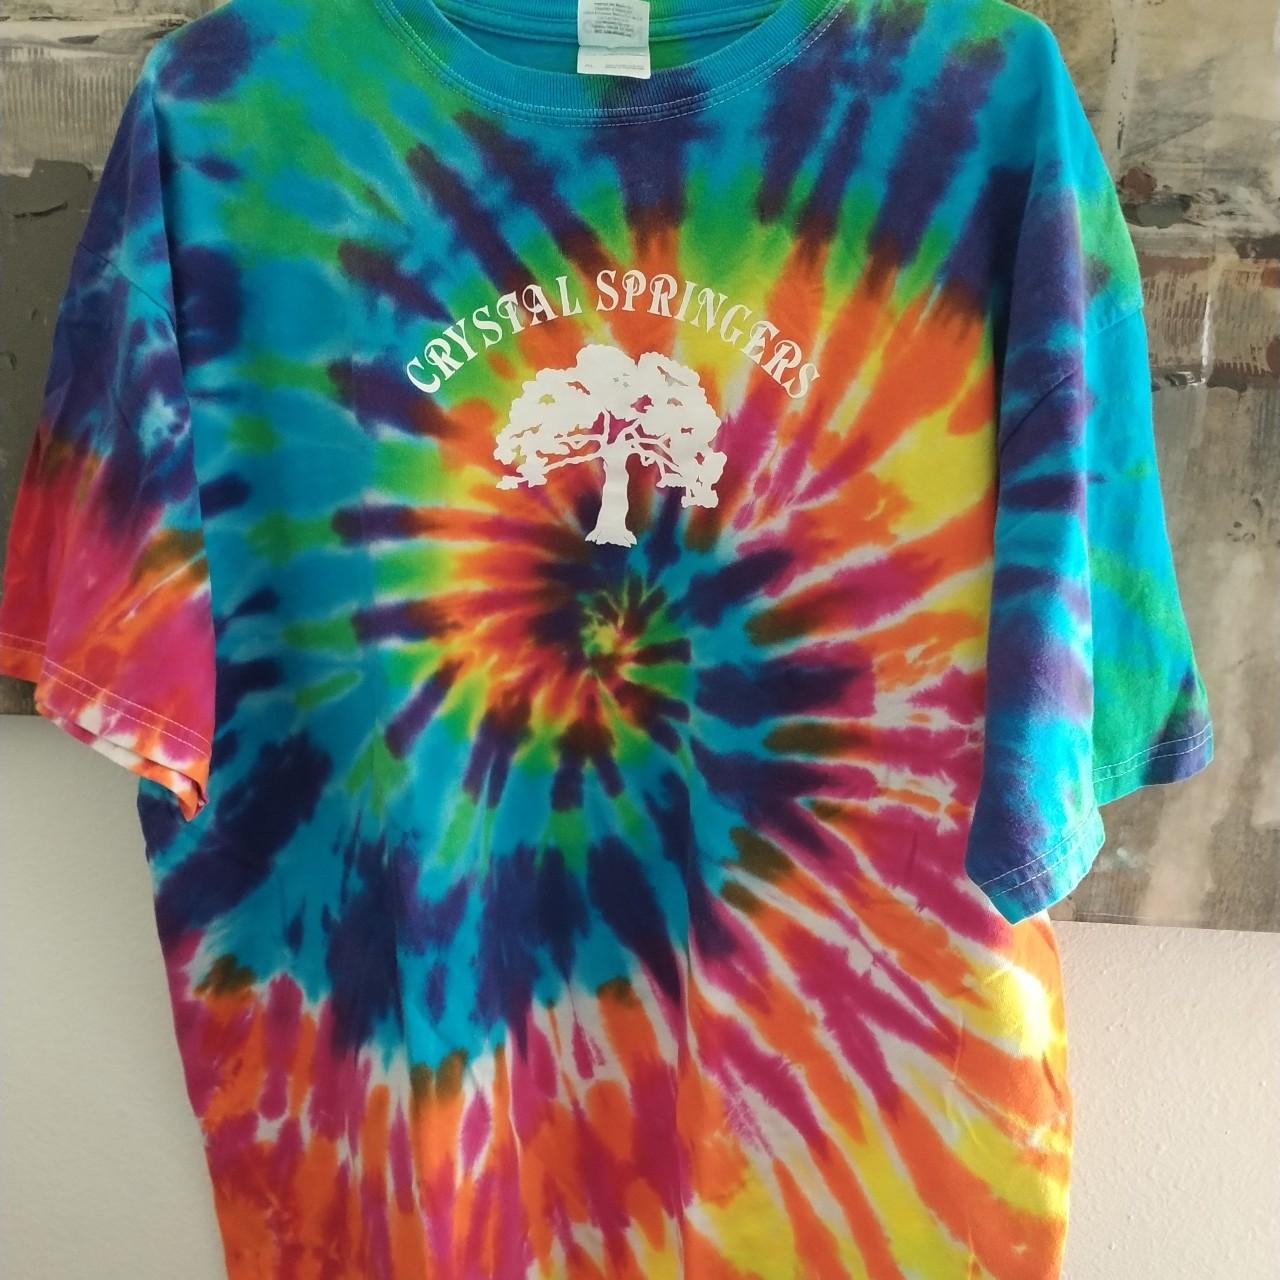 Product Image 1 - Crystal springers tie dye t-shirt